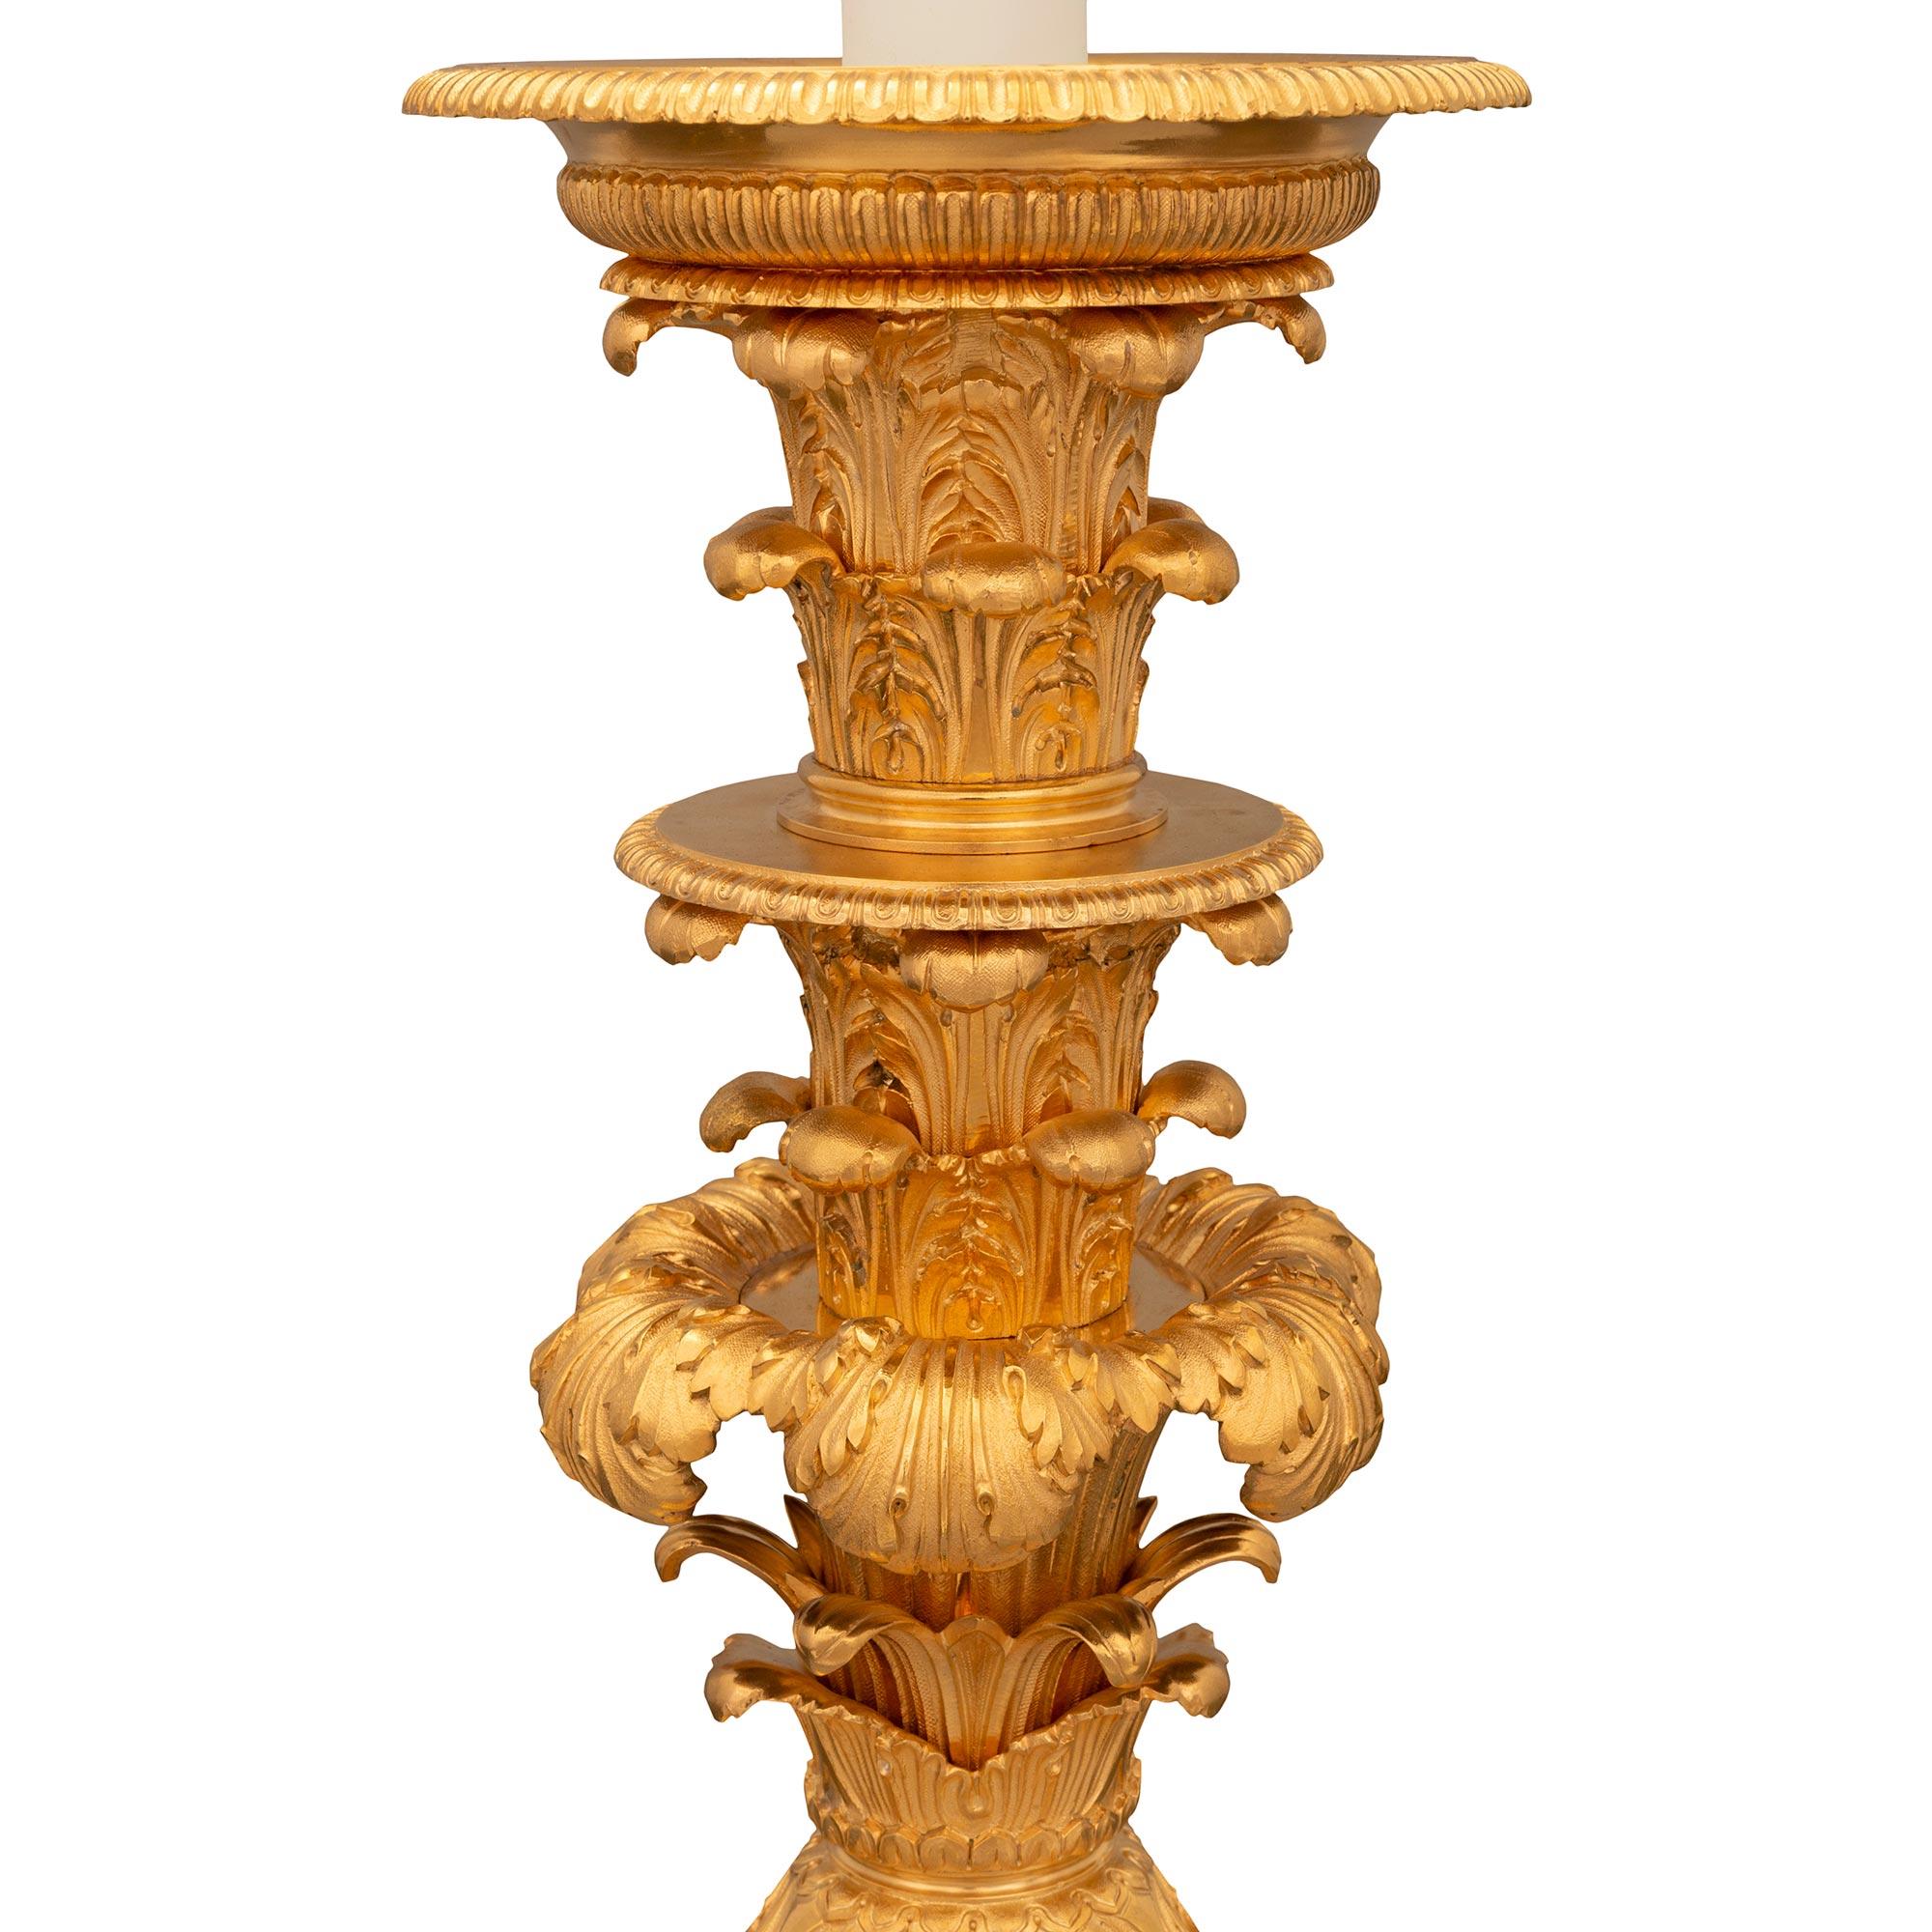 French 19th Century Empire St. Belle Époque Period Marble and Ormolu Lamp For Sale 2